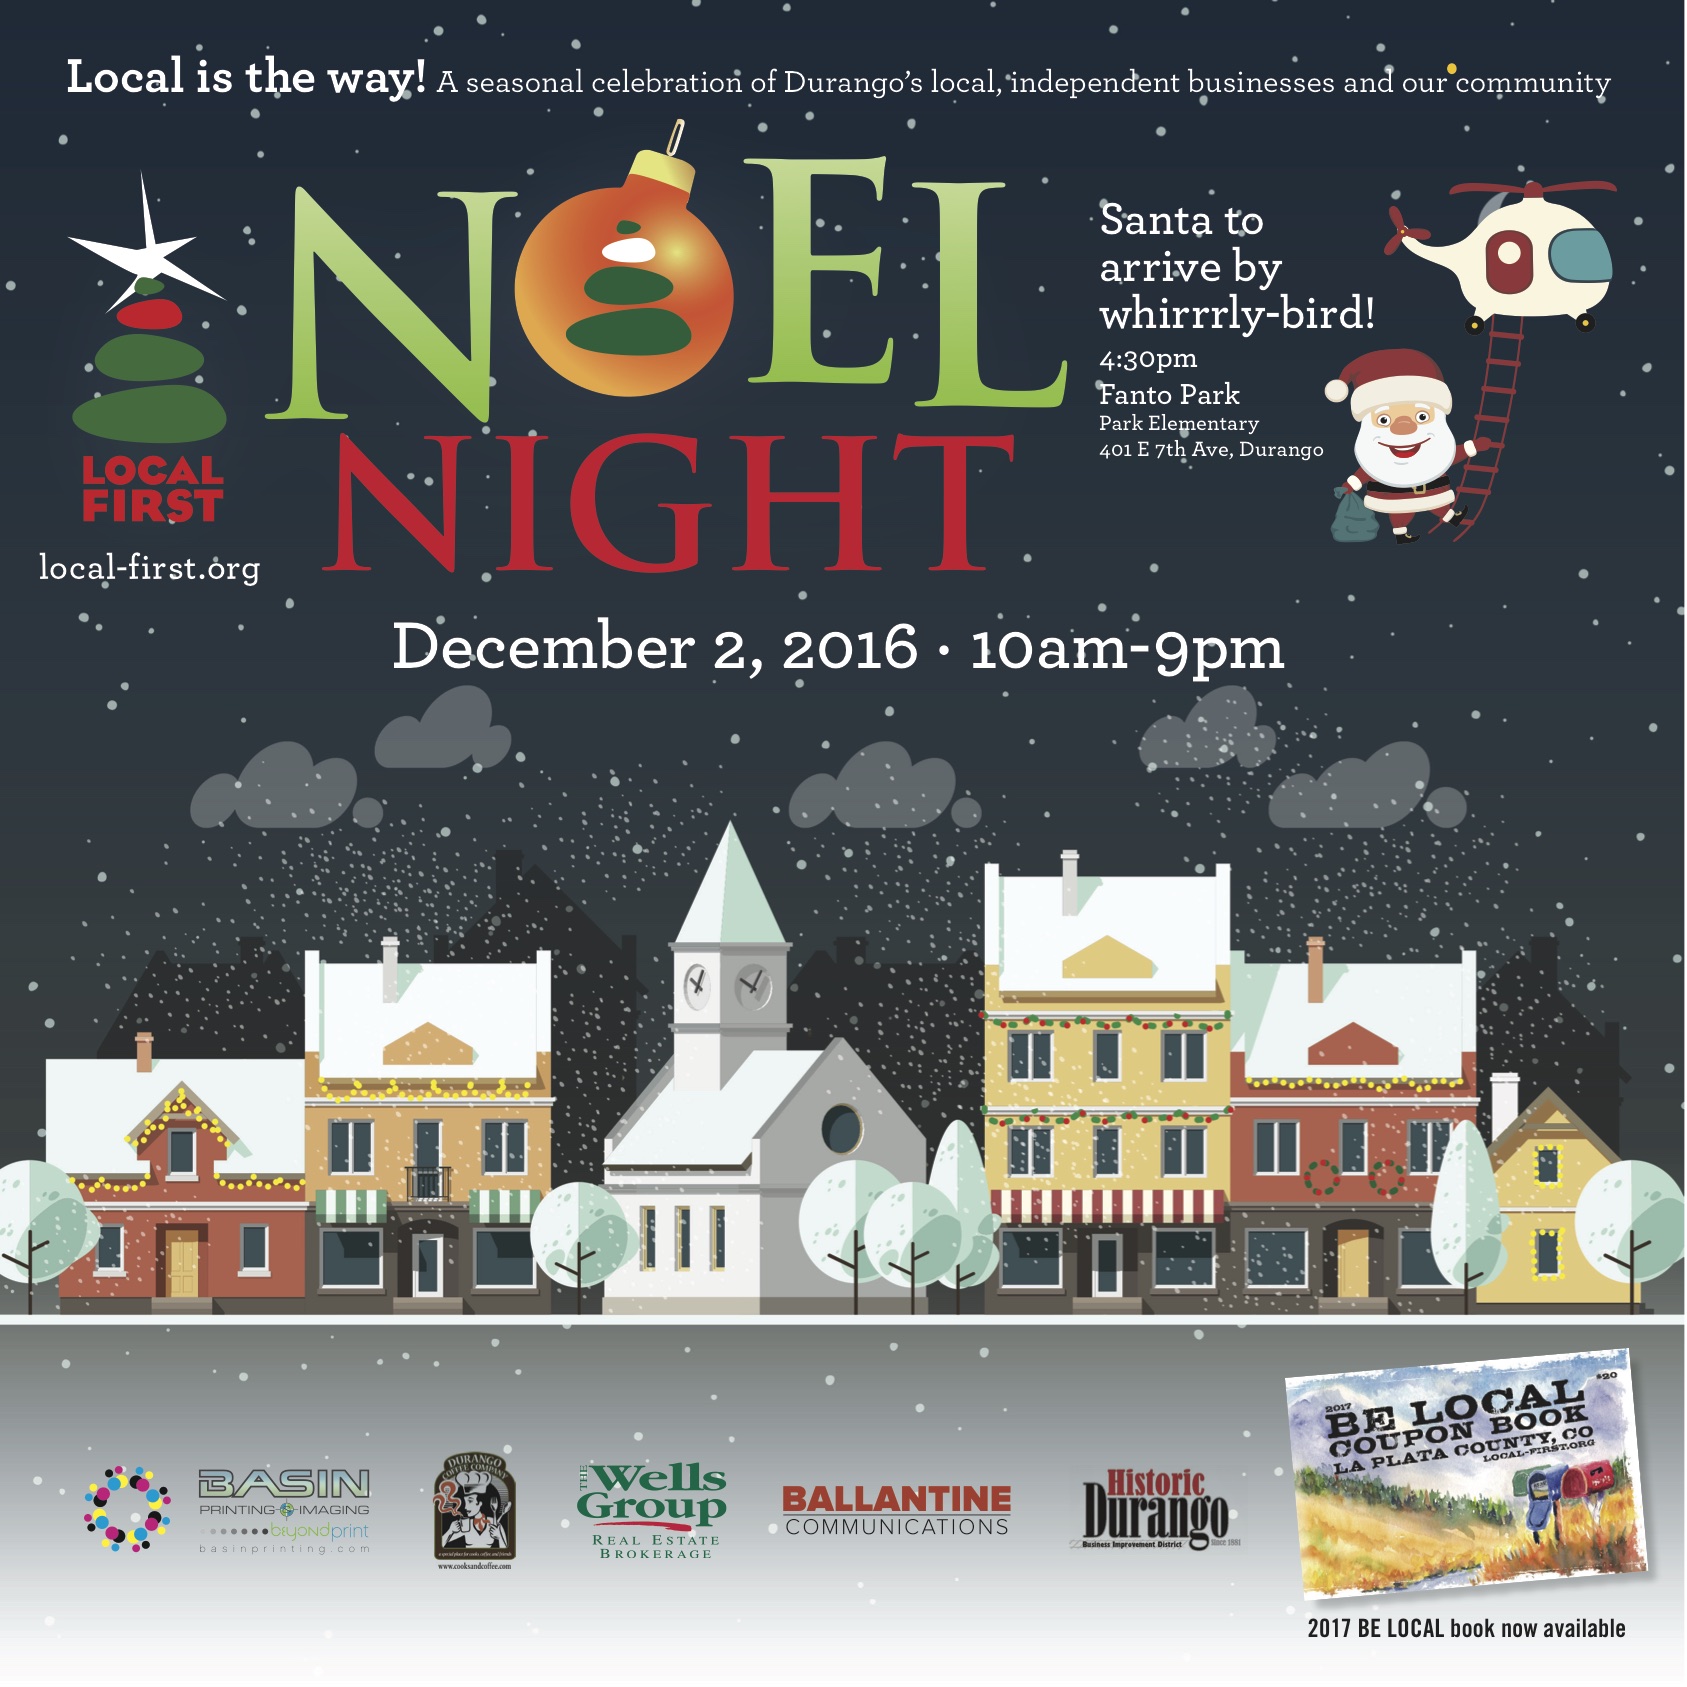 Are you Ready for Noel Night 2016?